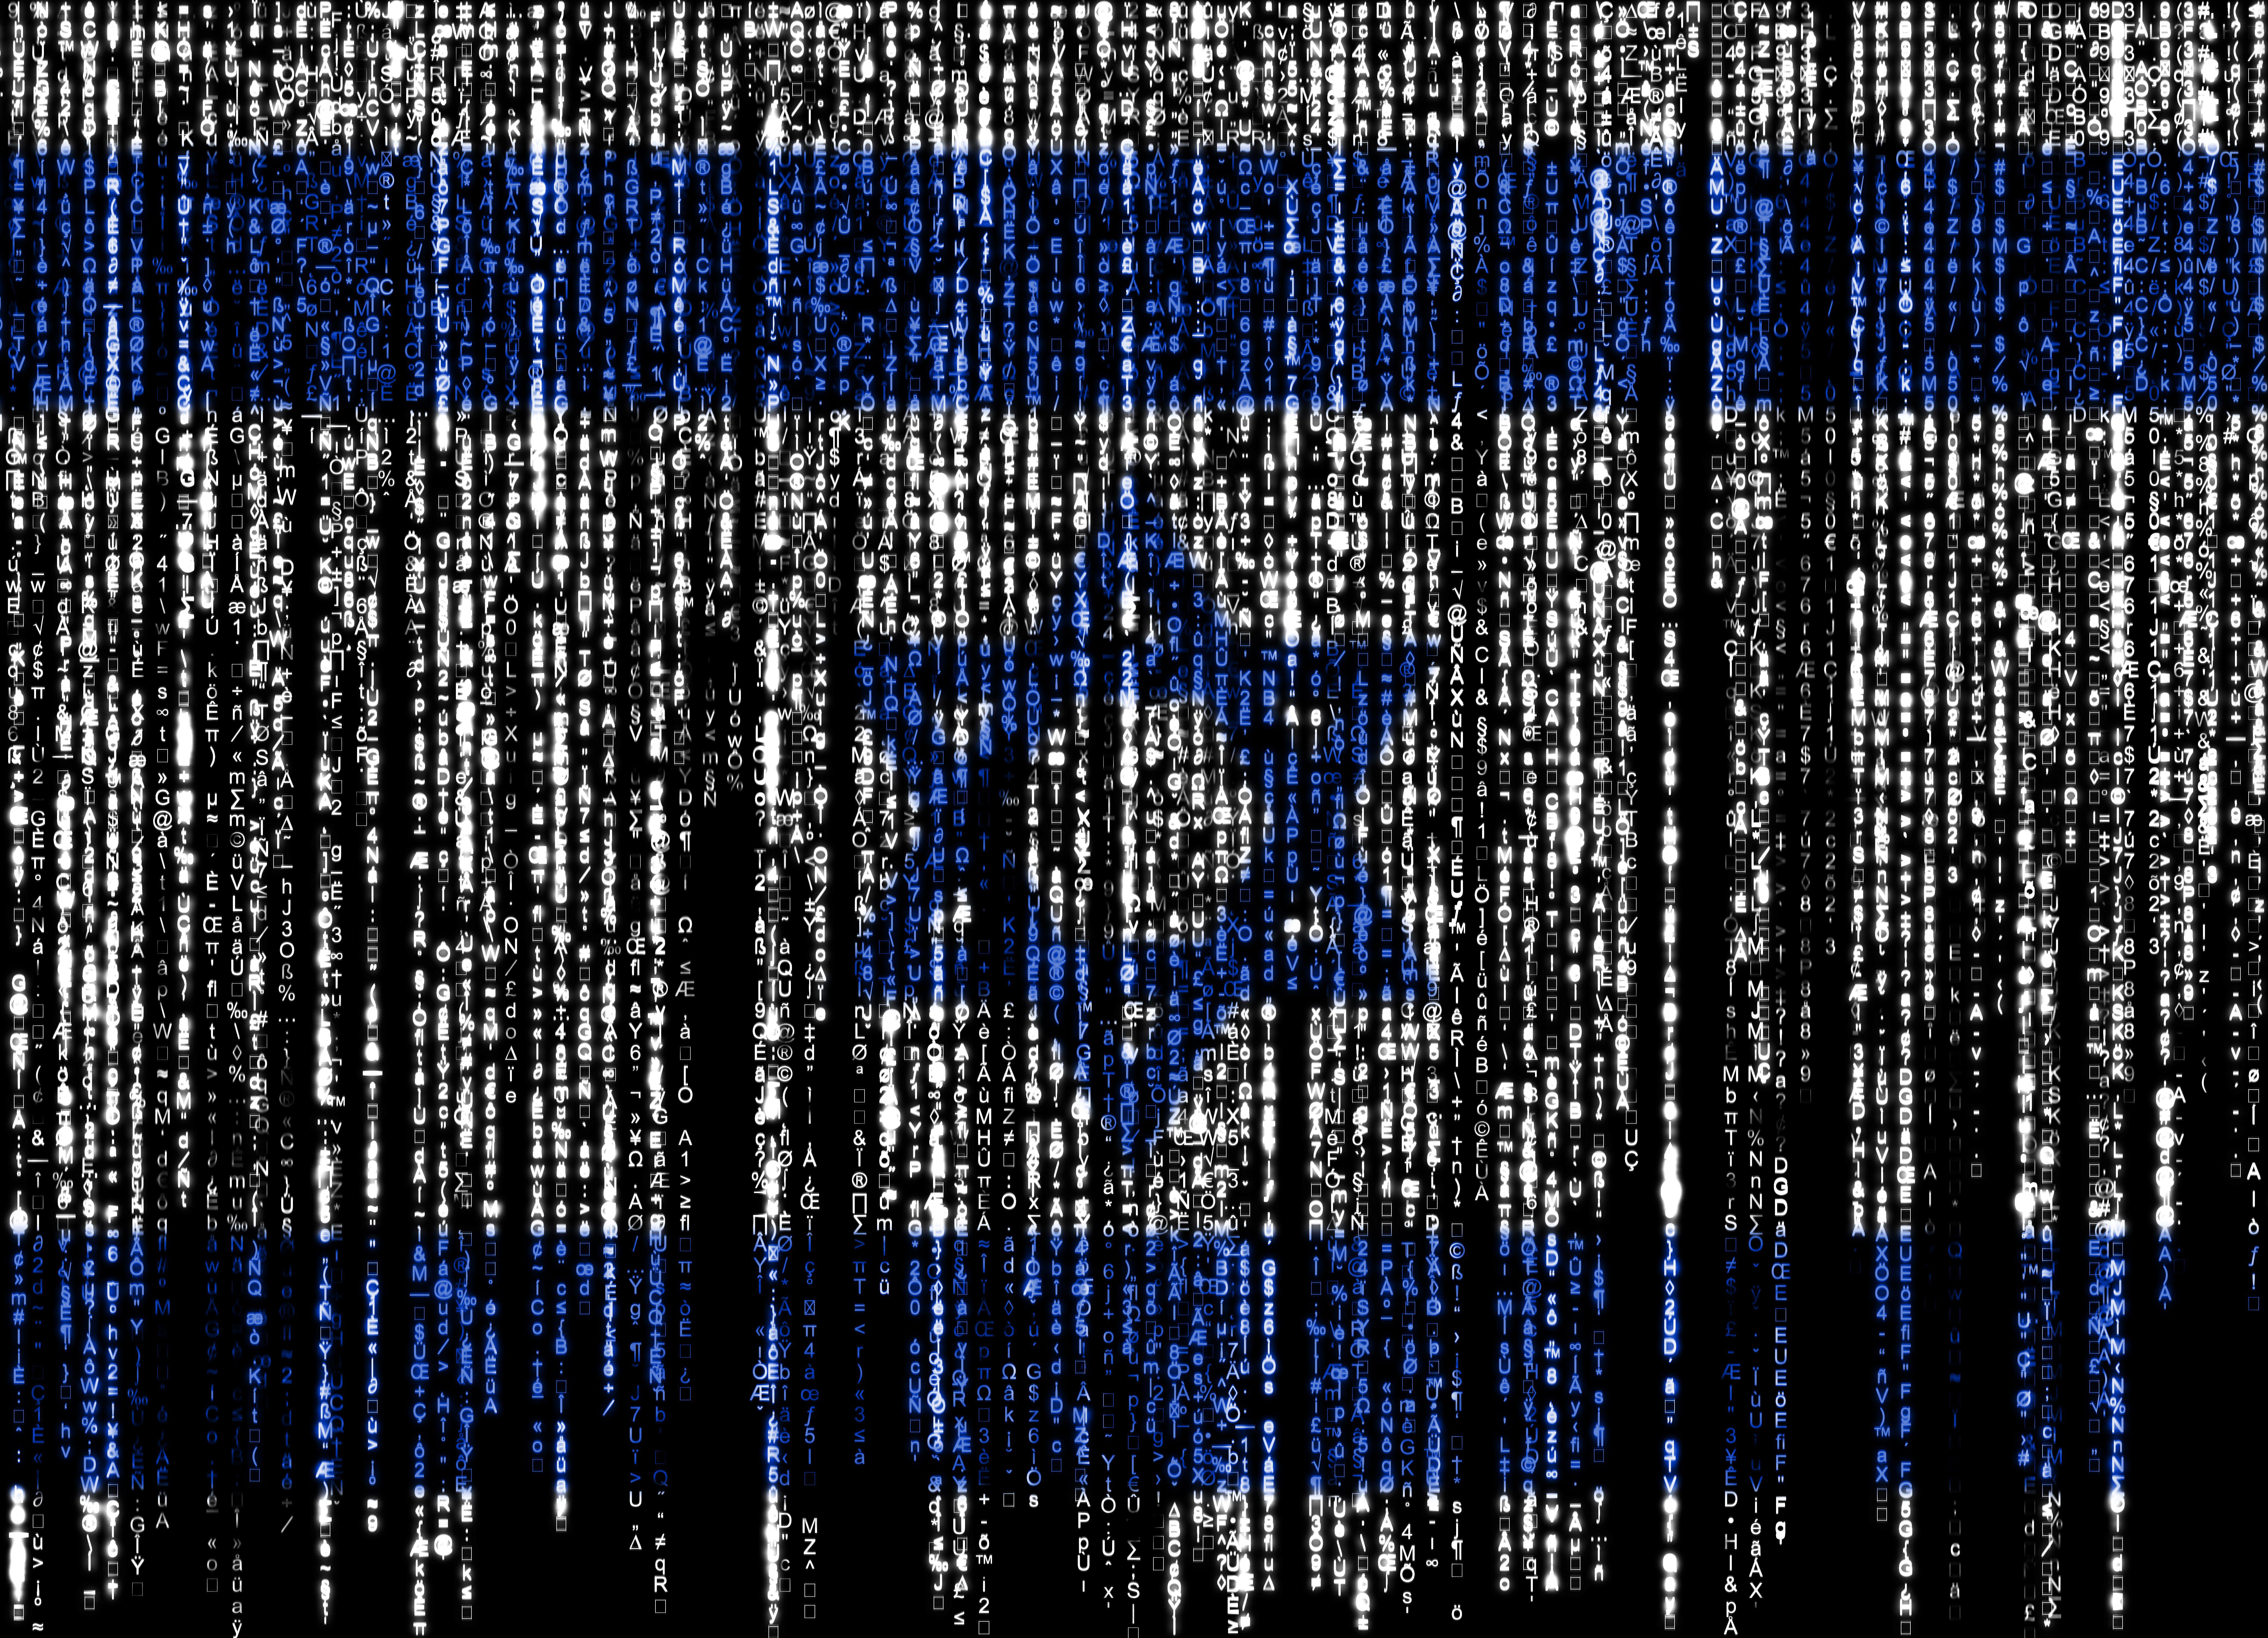 From Dark Reading – Hackers Claim to Breach Israeli Defense Force Medical Data